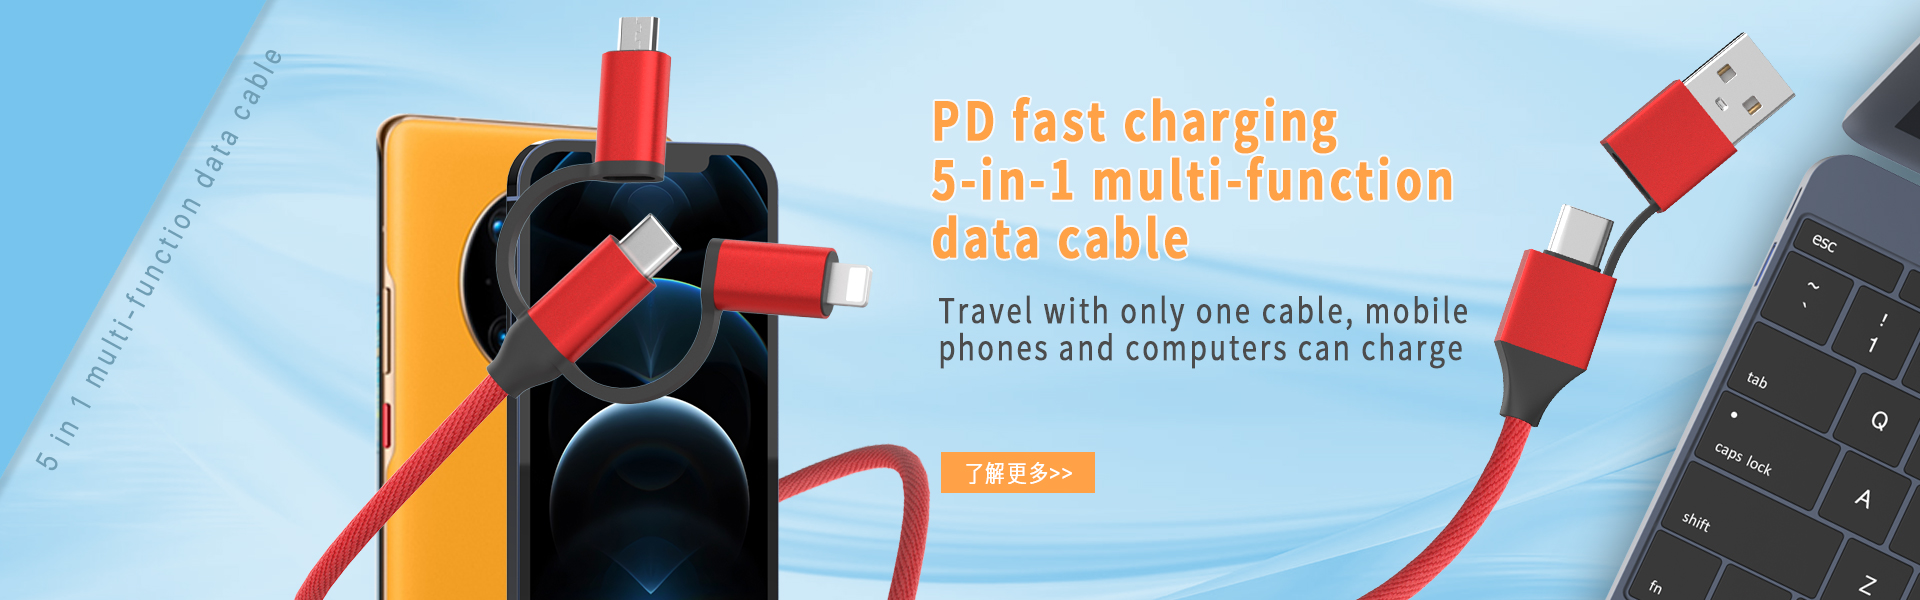 PD Quick Charger 5-in-1 PD Multi-function Data Cable